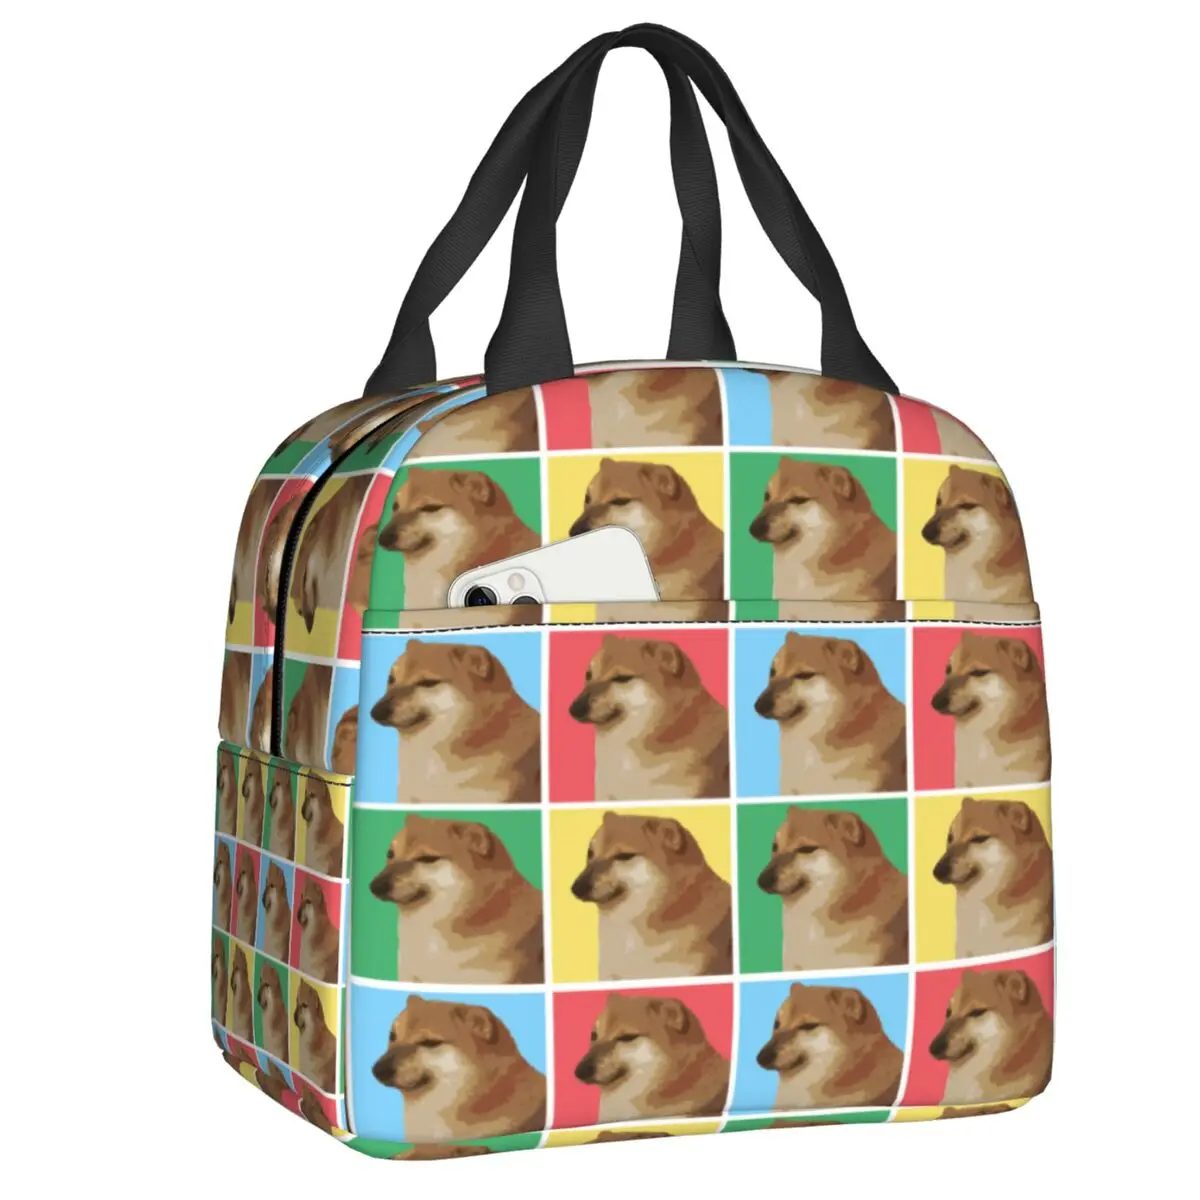 

Vaporwave Aesthetic Cheems Lunch Bag Shiba Inu Doge Meme Reusable Food Thermal Cooler Insulated Lunch Box Women Kids Tote Bags